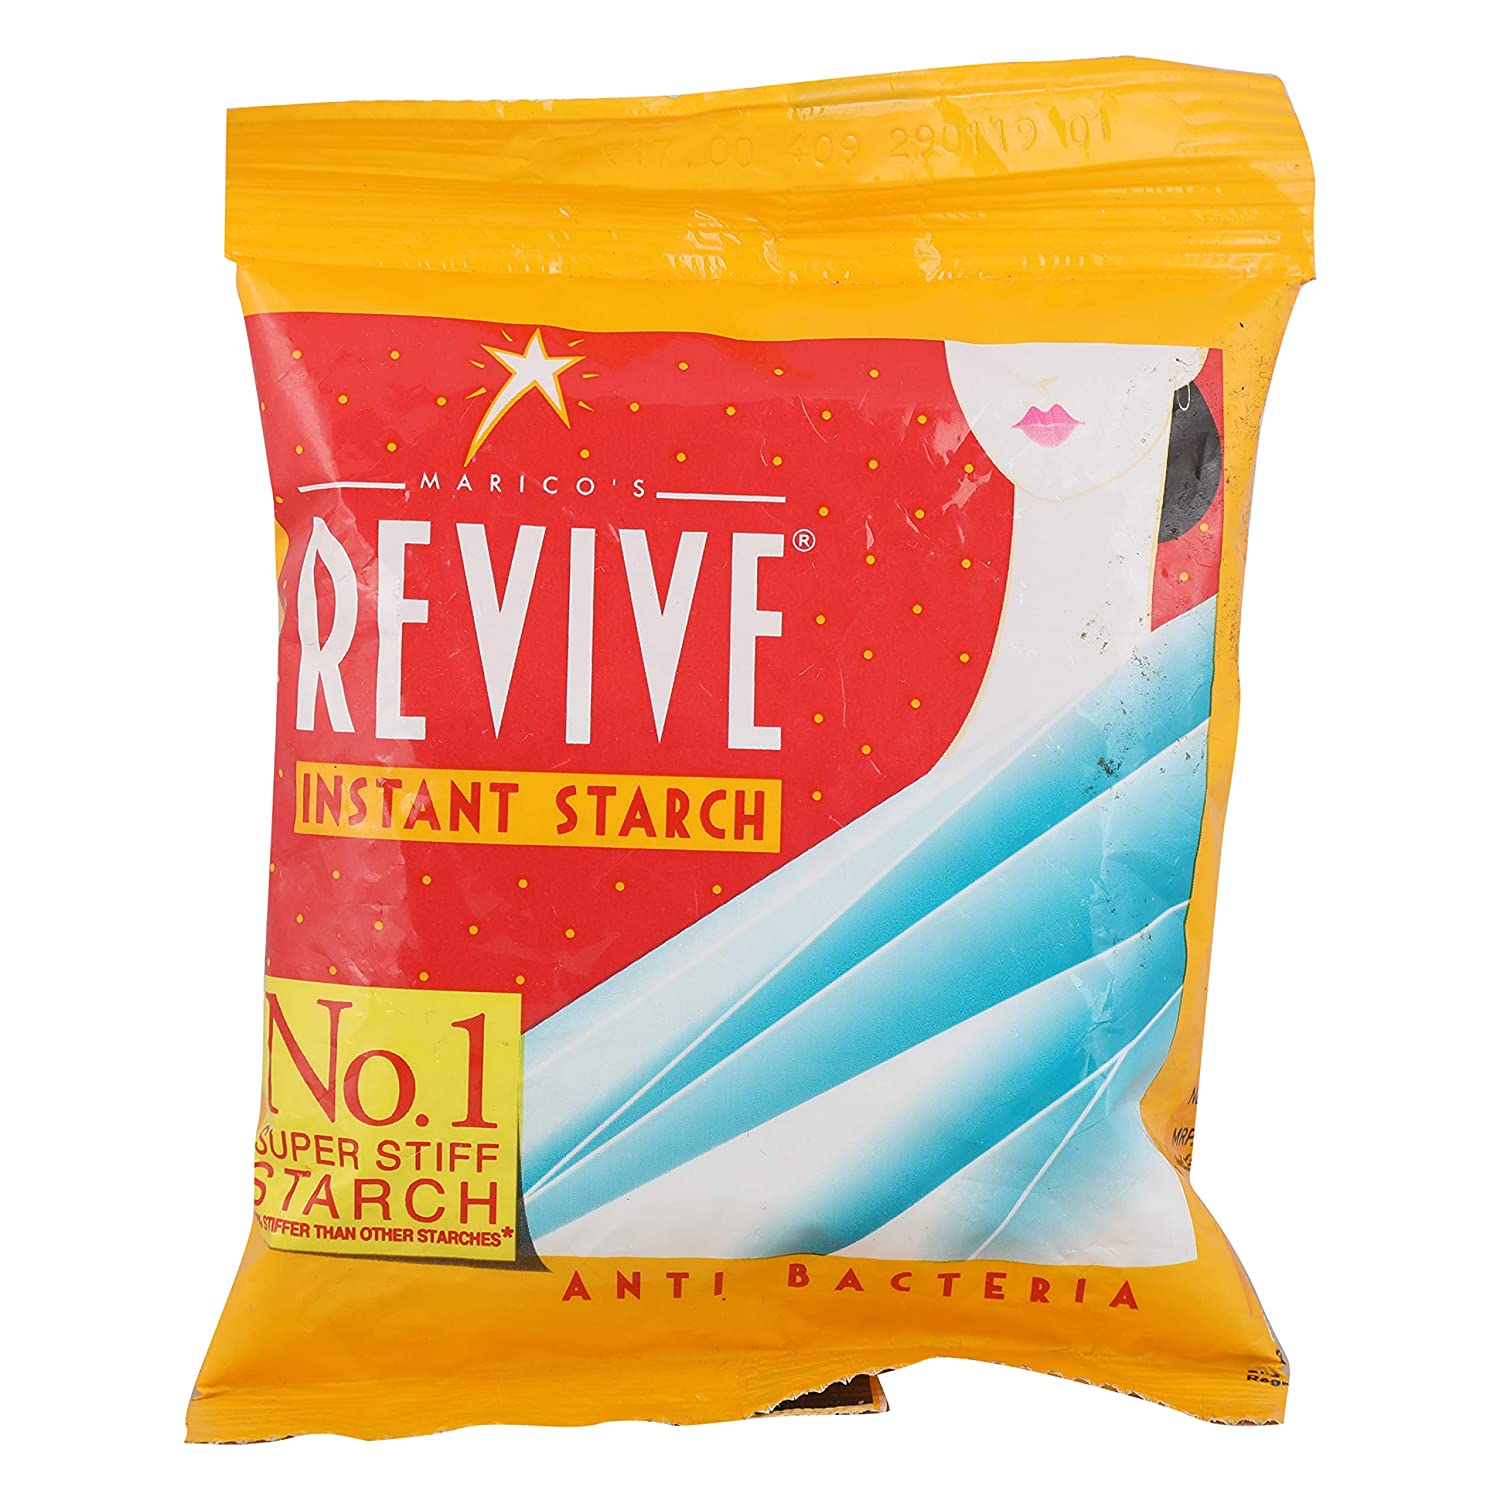 public/product_primary_images/1597072351-revive-instant-starch-200g.jpg